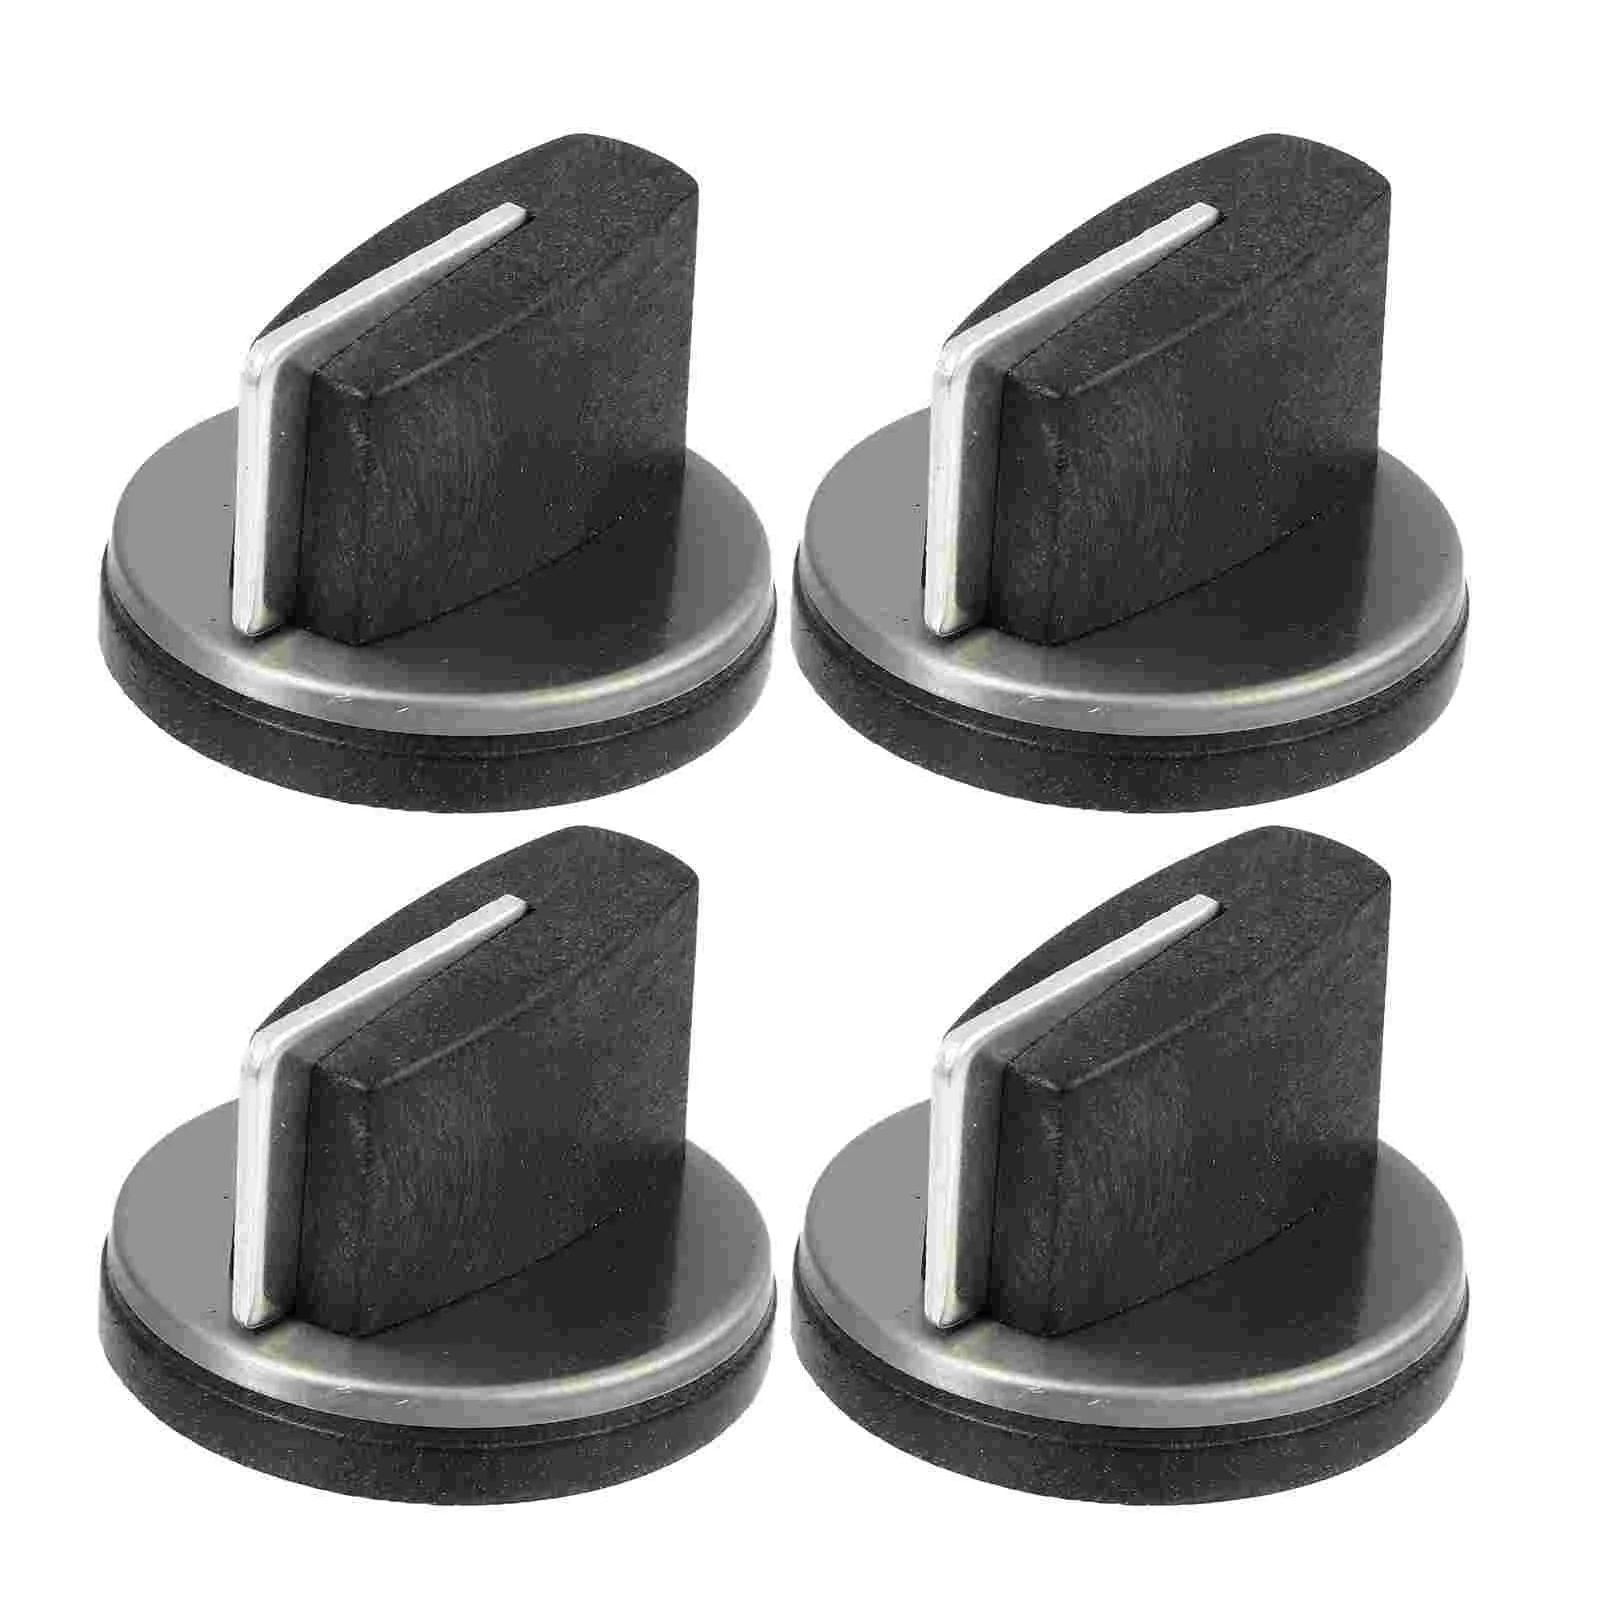 

4 Pcs Plastic Gas Stove On-Off Knobs Gas Stove Cooker Switch Right Angle 0°